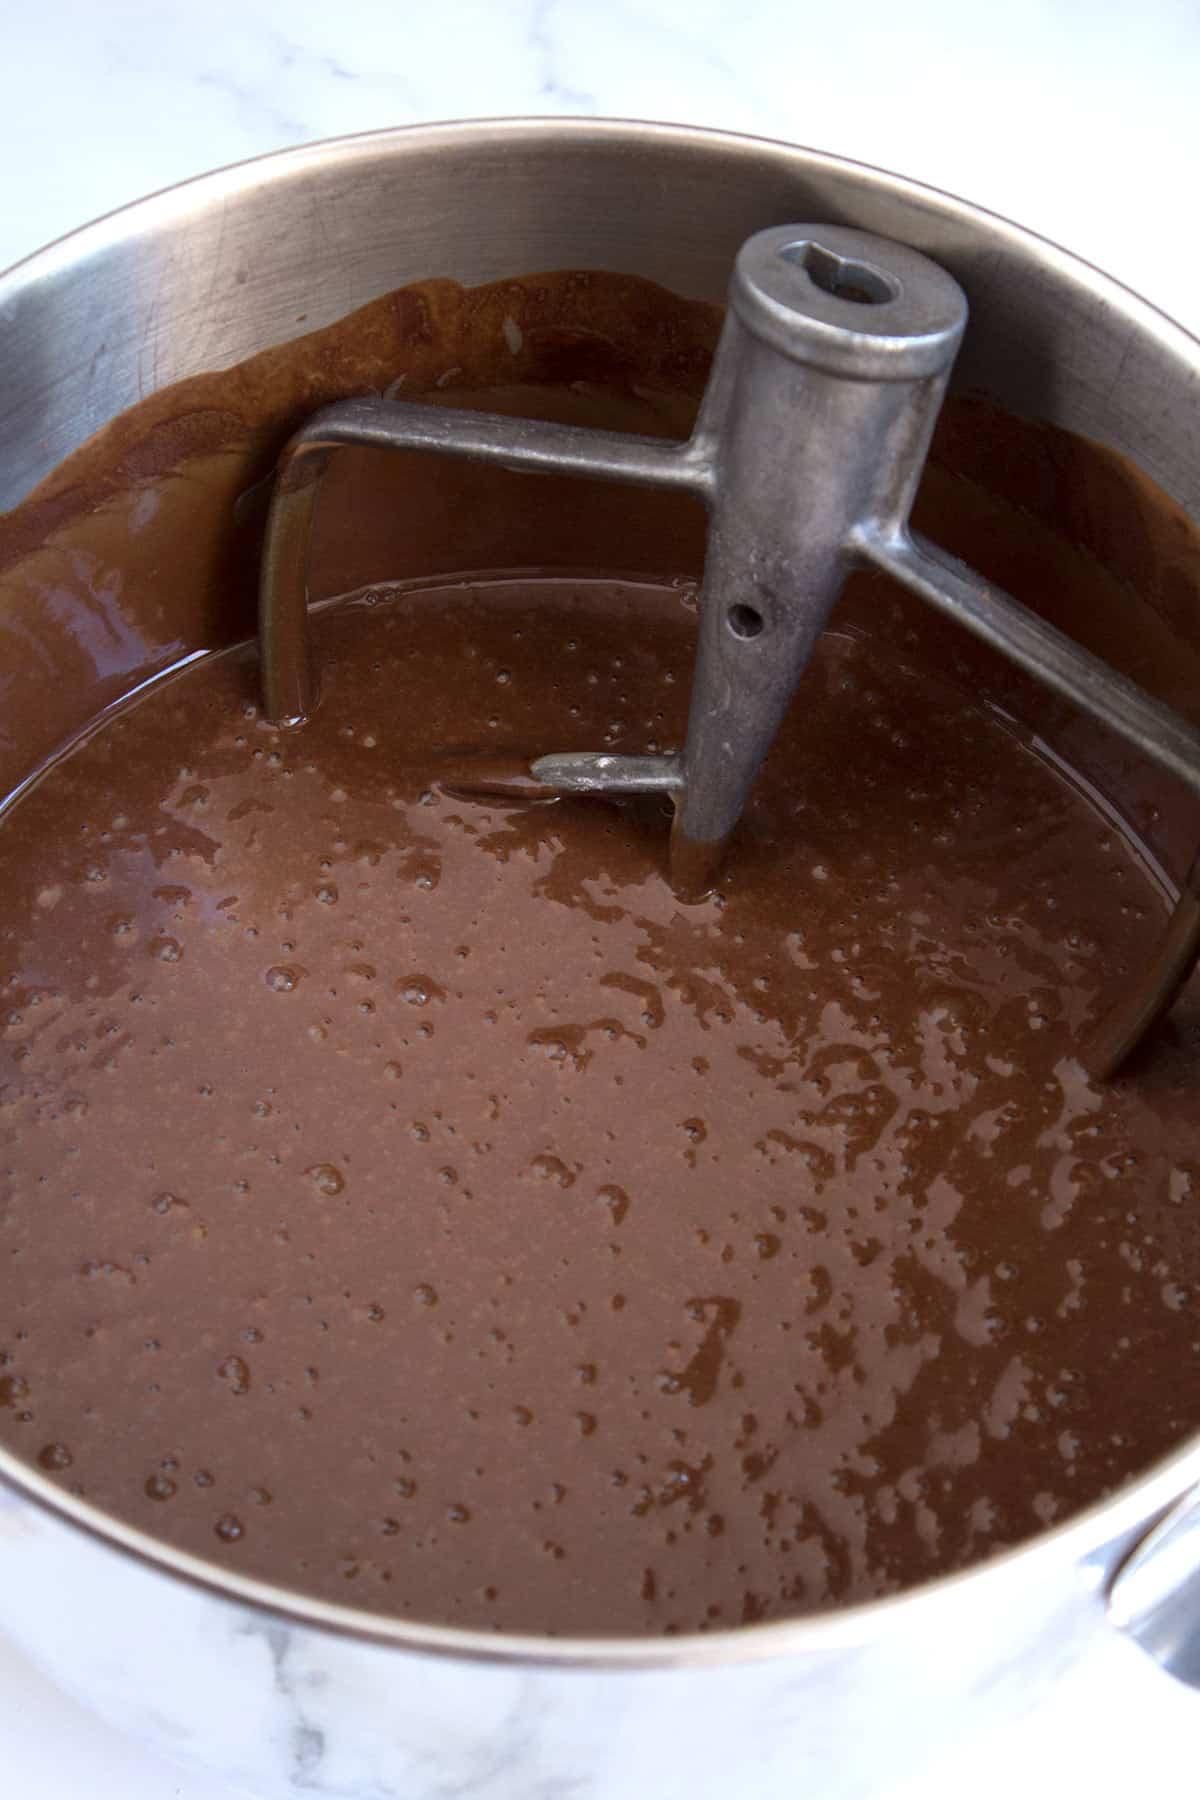 Chocolate cake batter in a mixing bowl with the paddle attachment in the bowl.